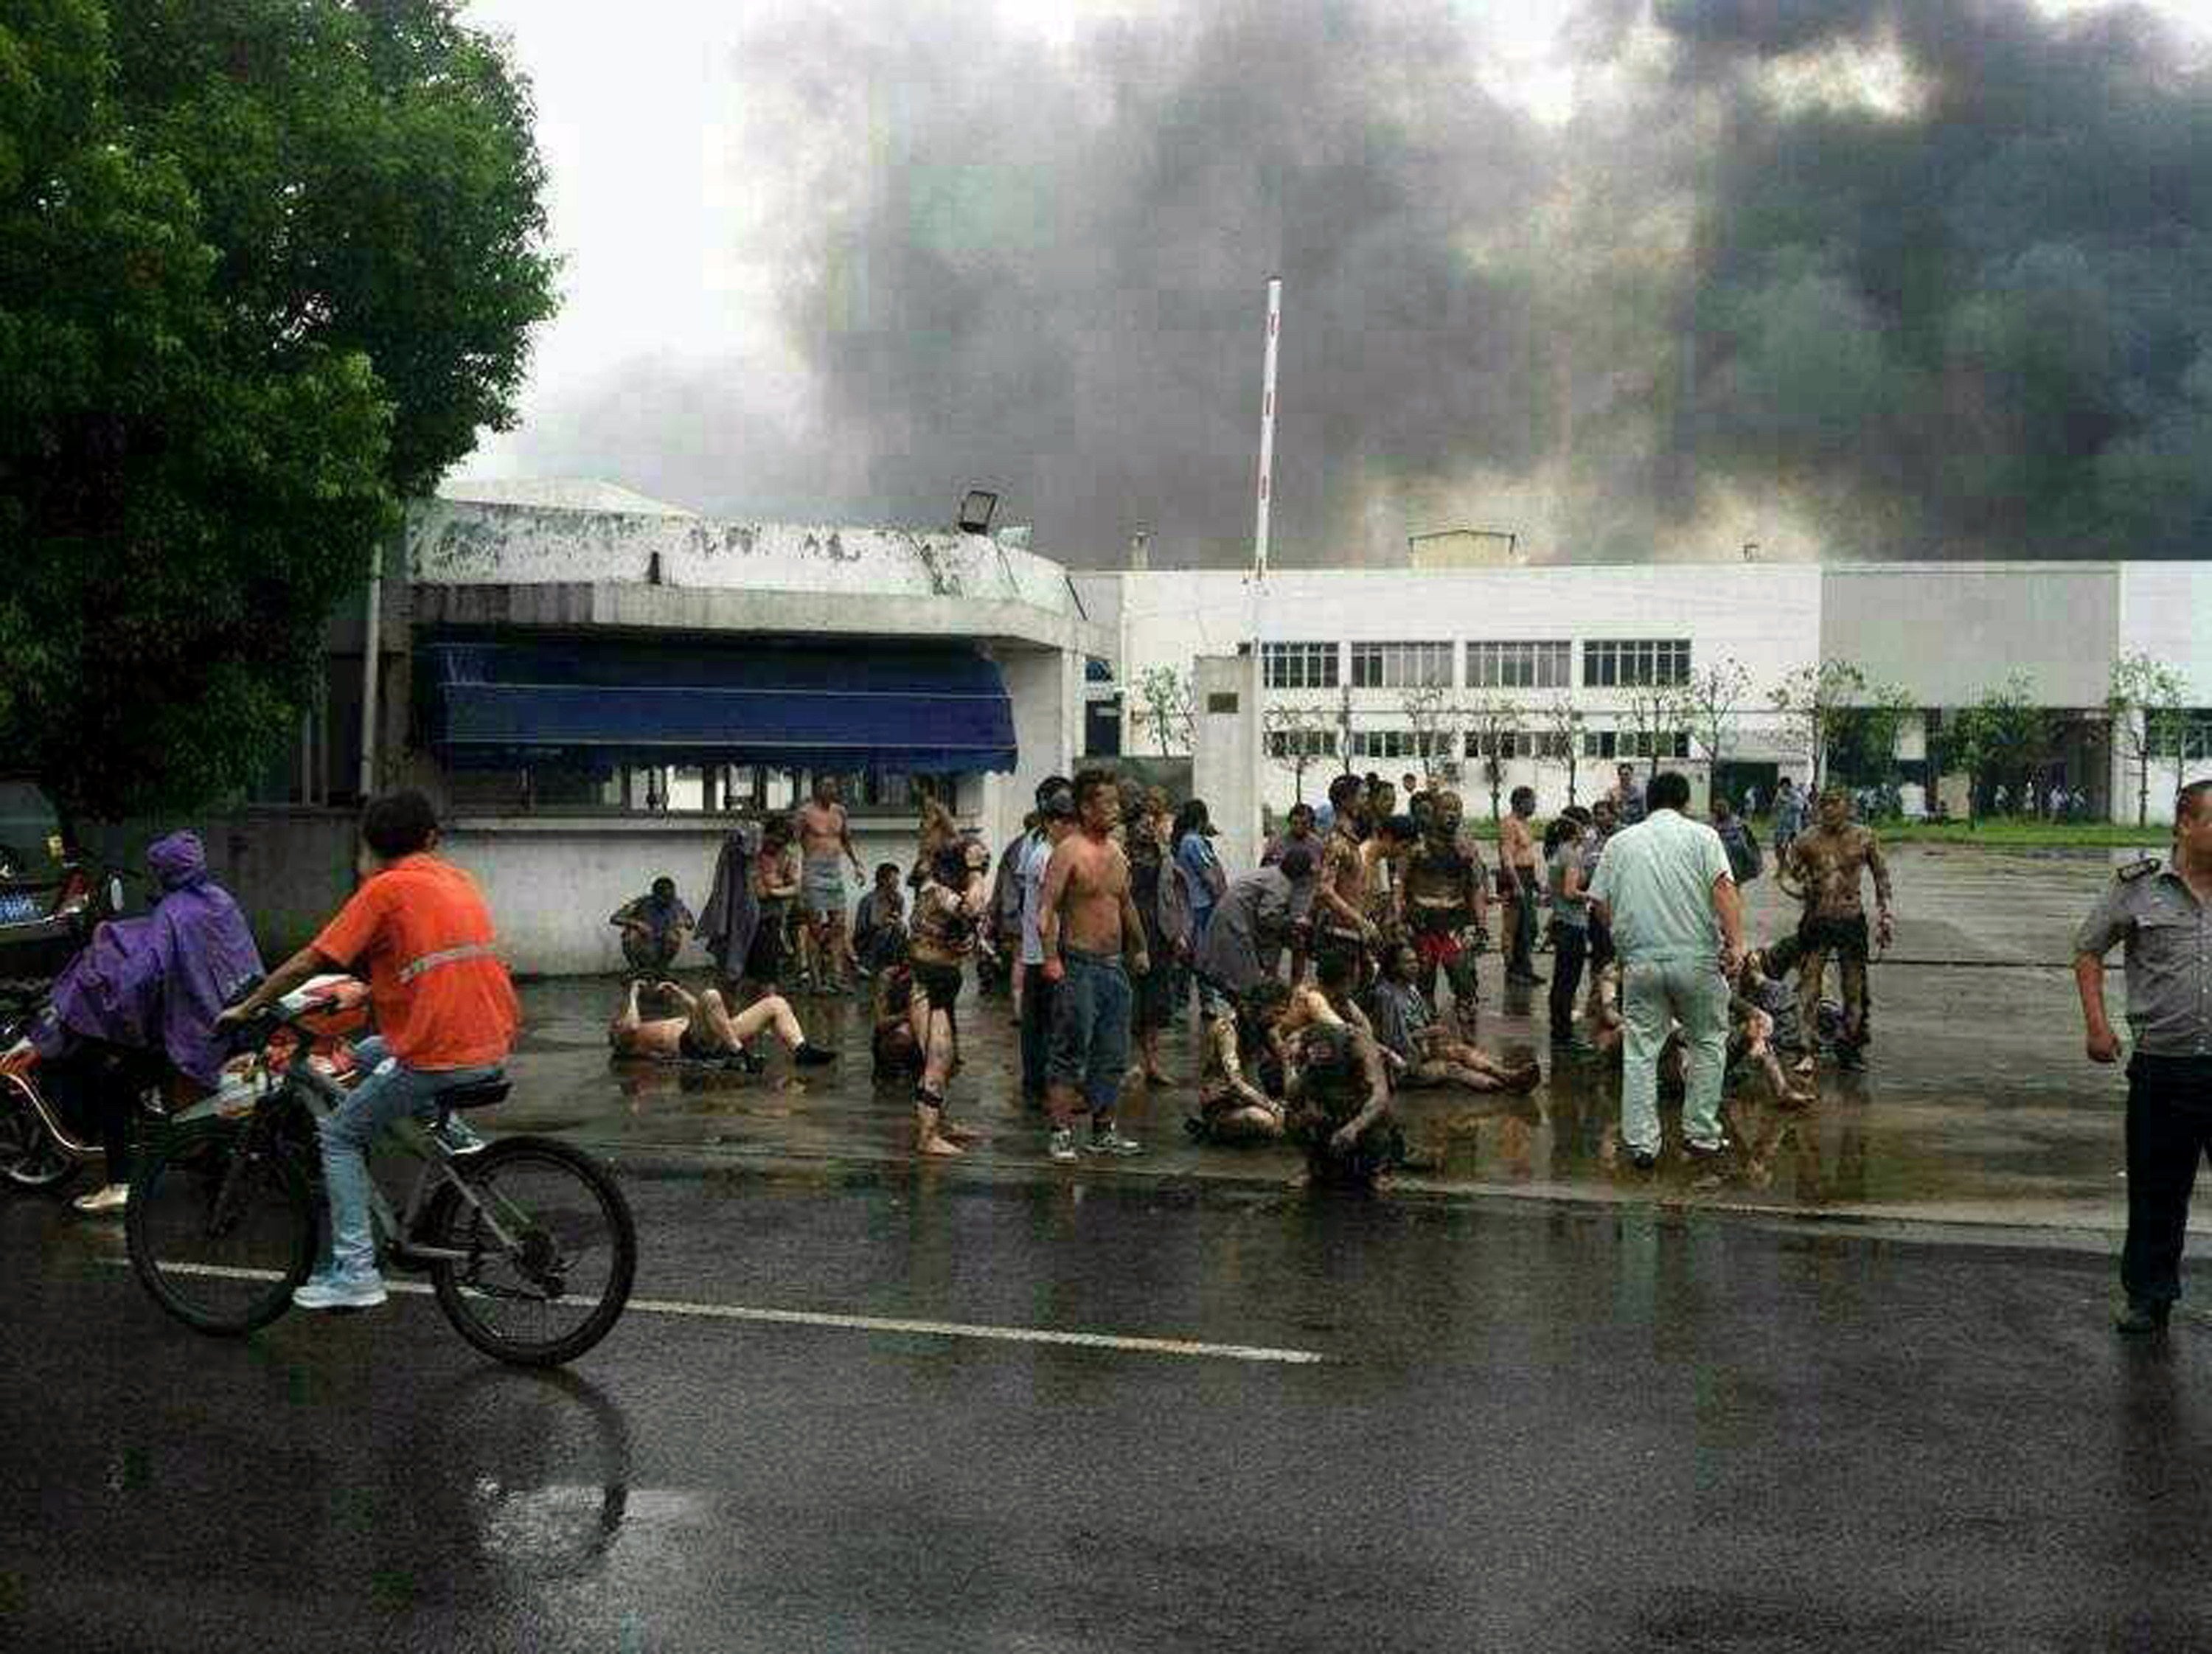 Victims gather outside the gate of a factory after an explosion in Kunshan, east China's Jiangsu province. An explosion killed 65 people as it ripped through a factory in eastern China, a government broadcaster said, injuring 150 in what appeared to be an